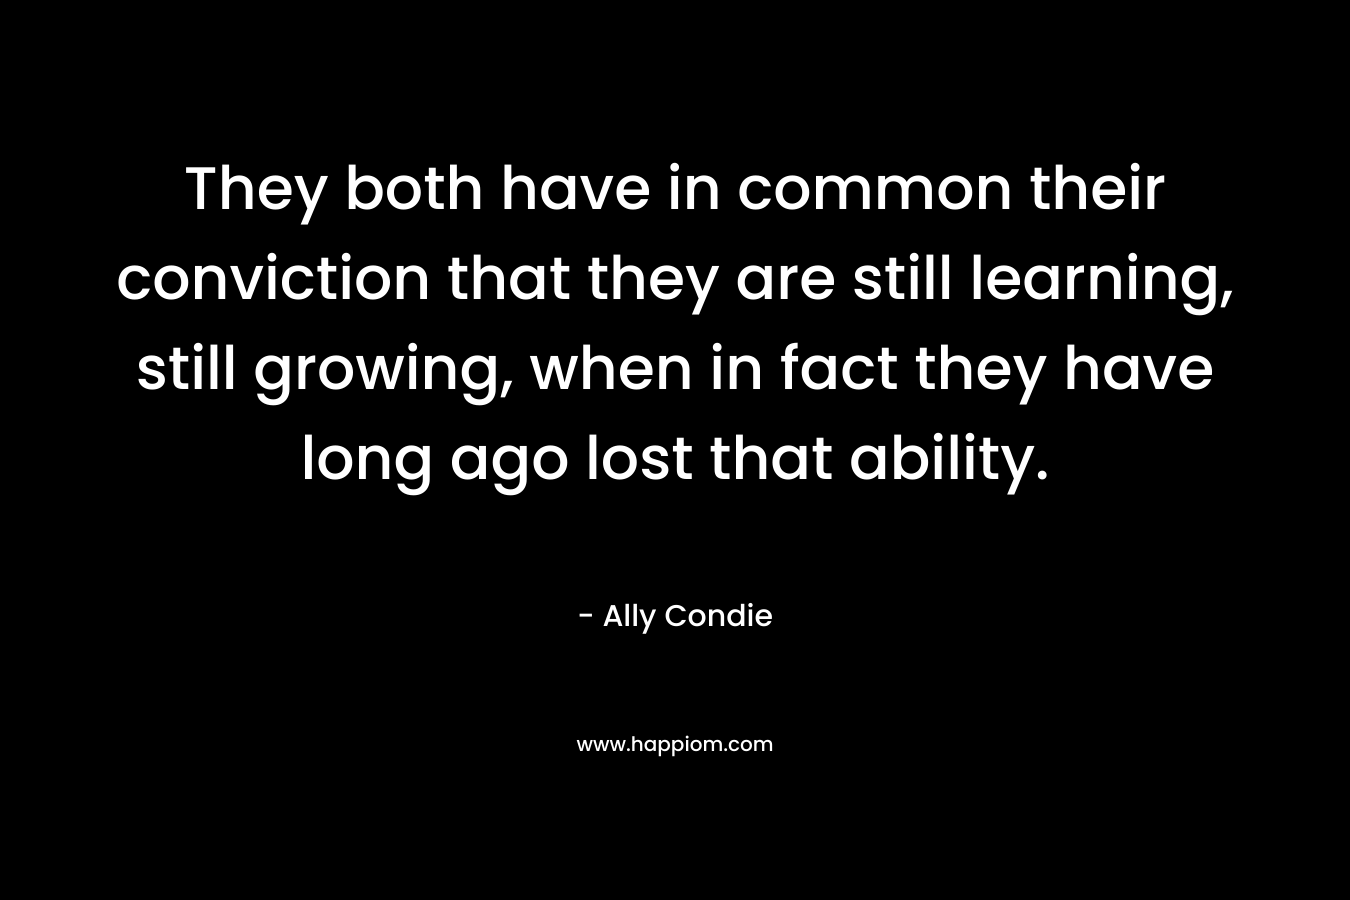 They both have in common their conviction that they are still learning, still growing, when in fact they have long ago lost that ability.